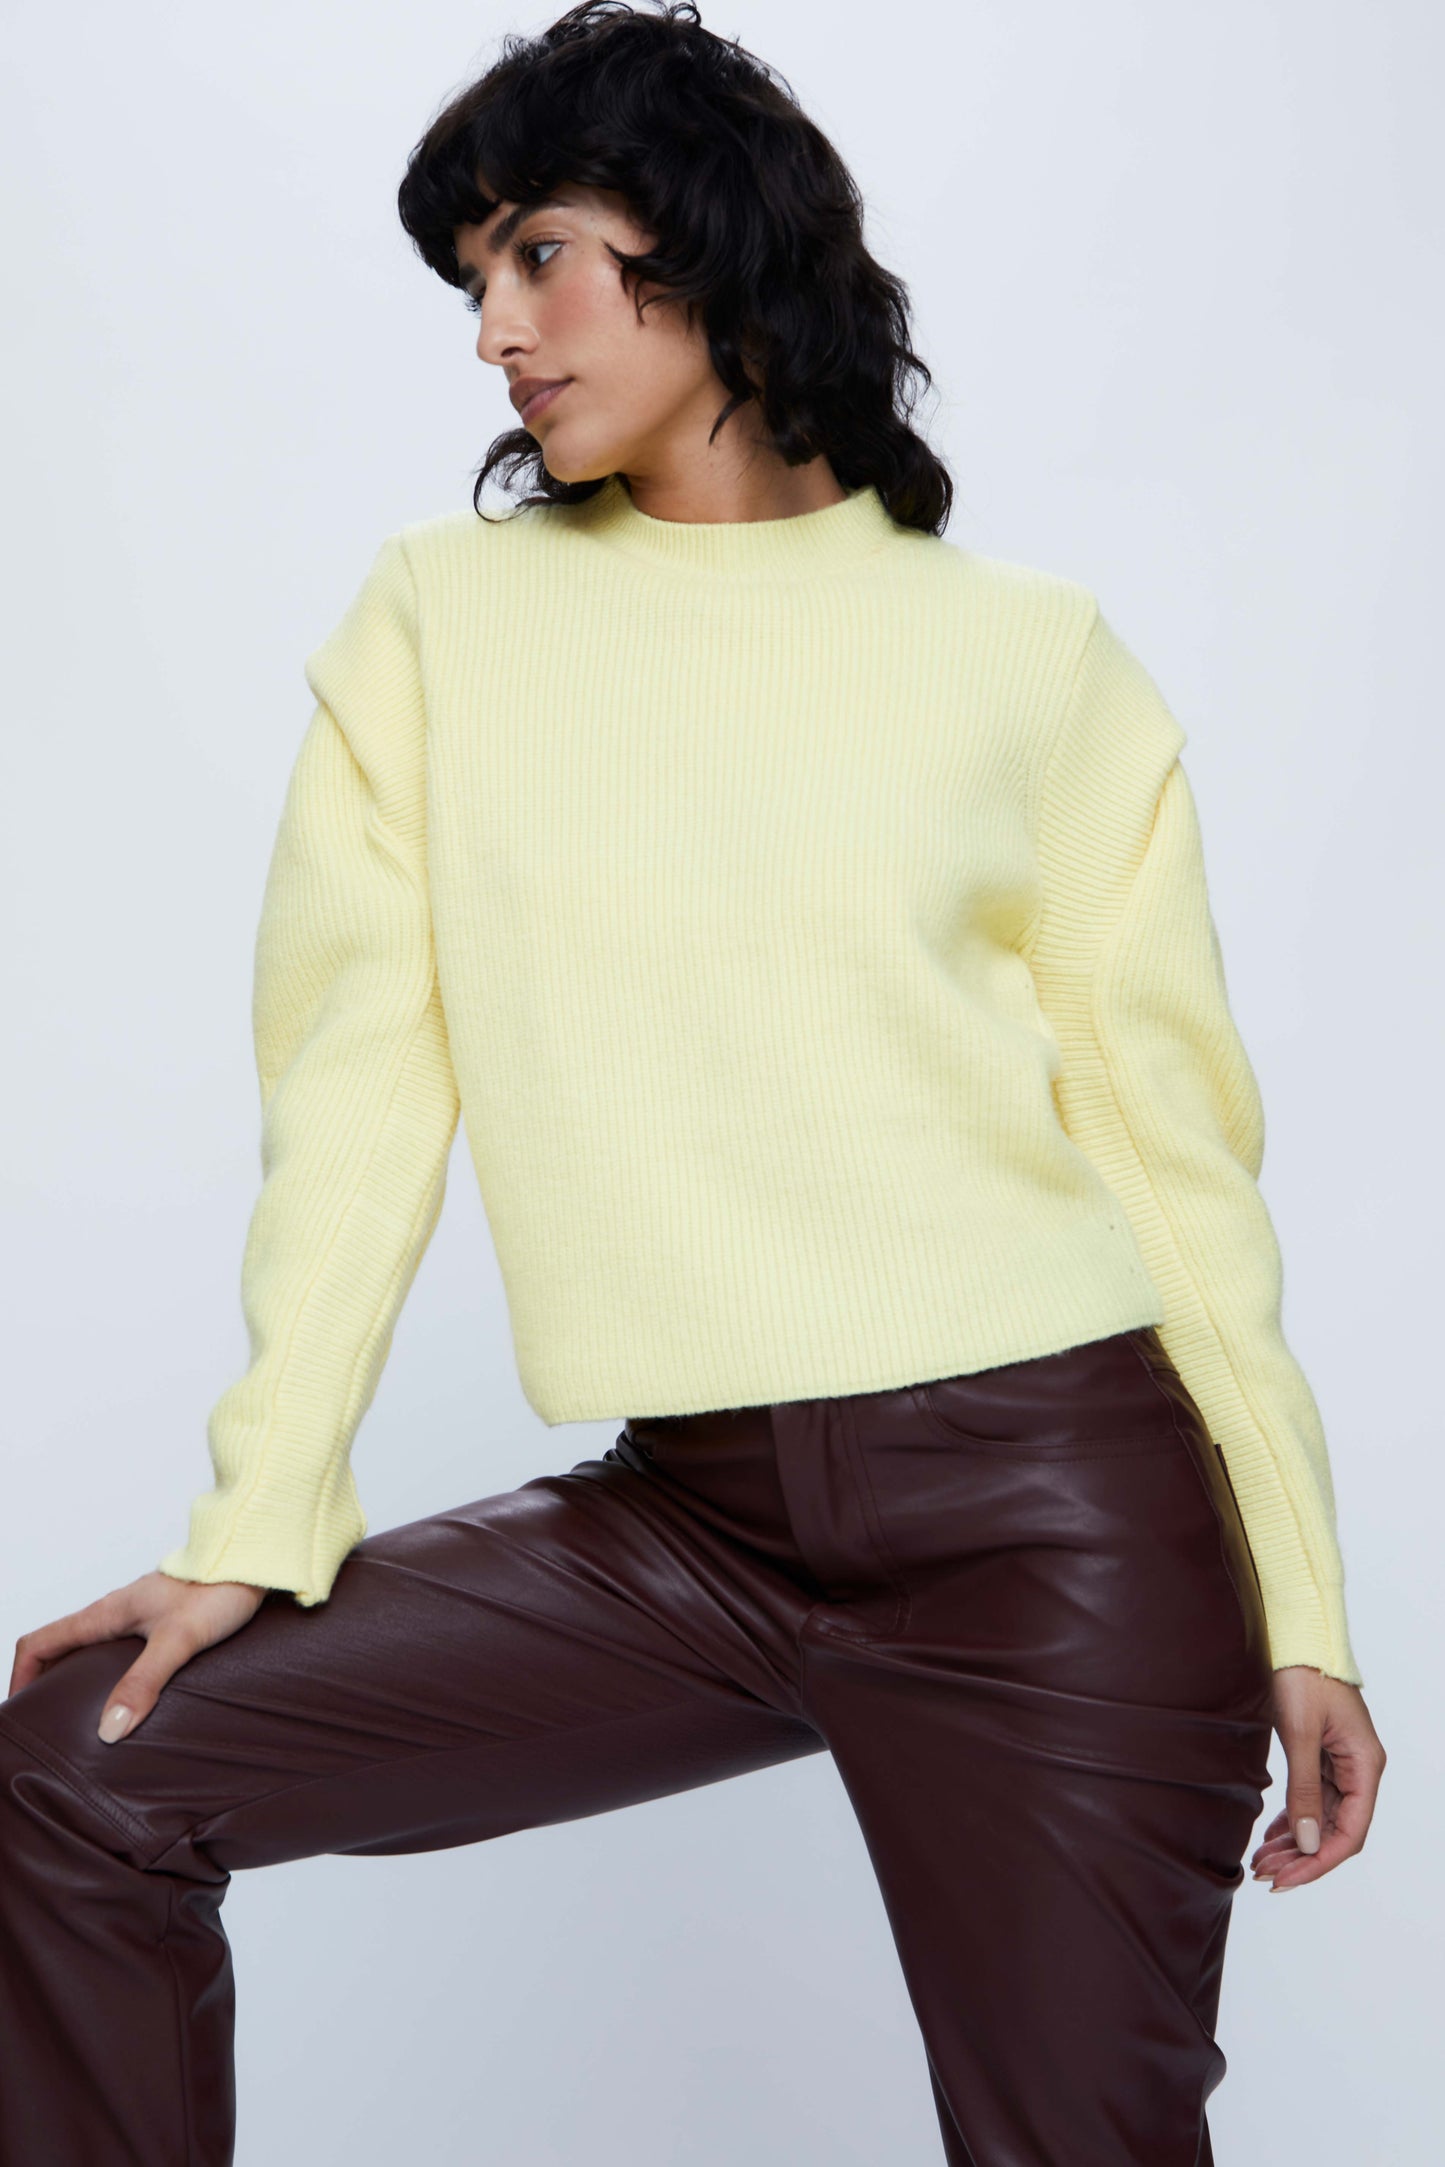 Knitted sweater with yellow shoulder detail